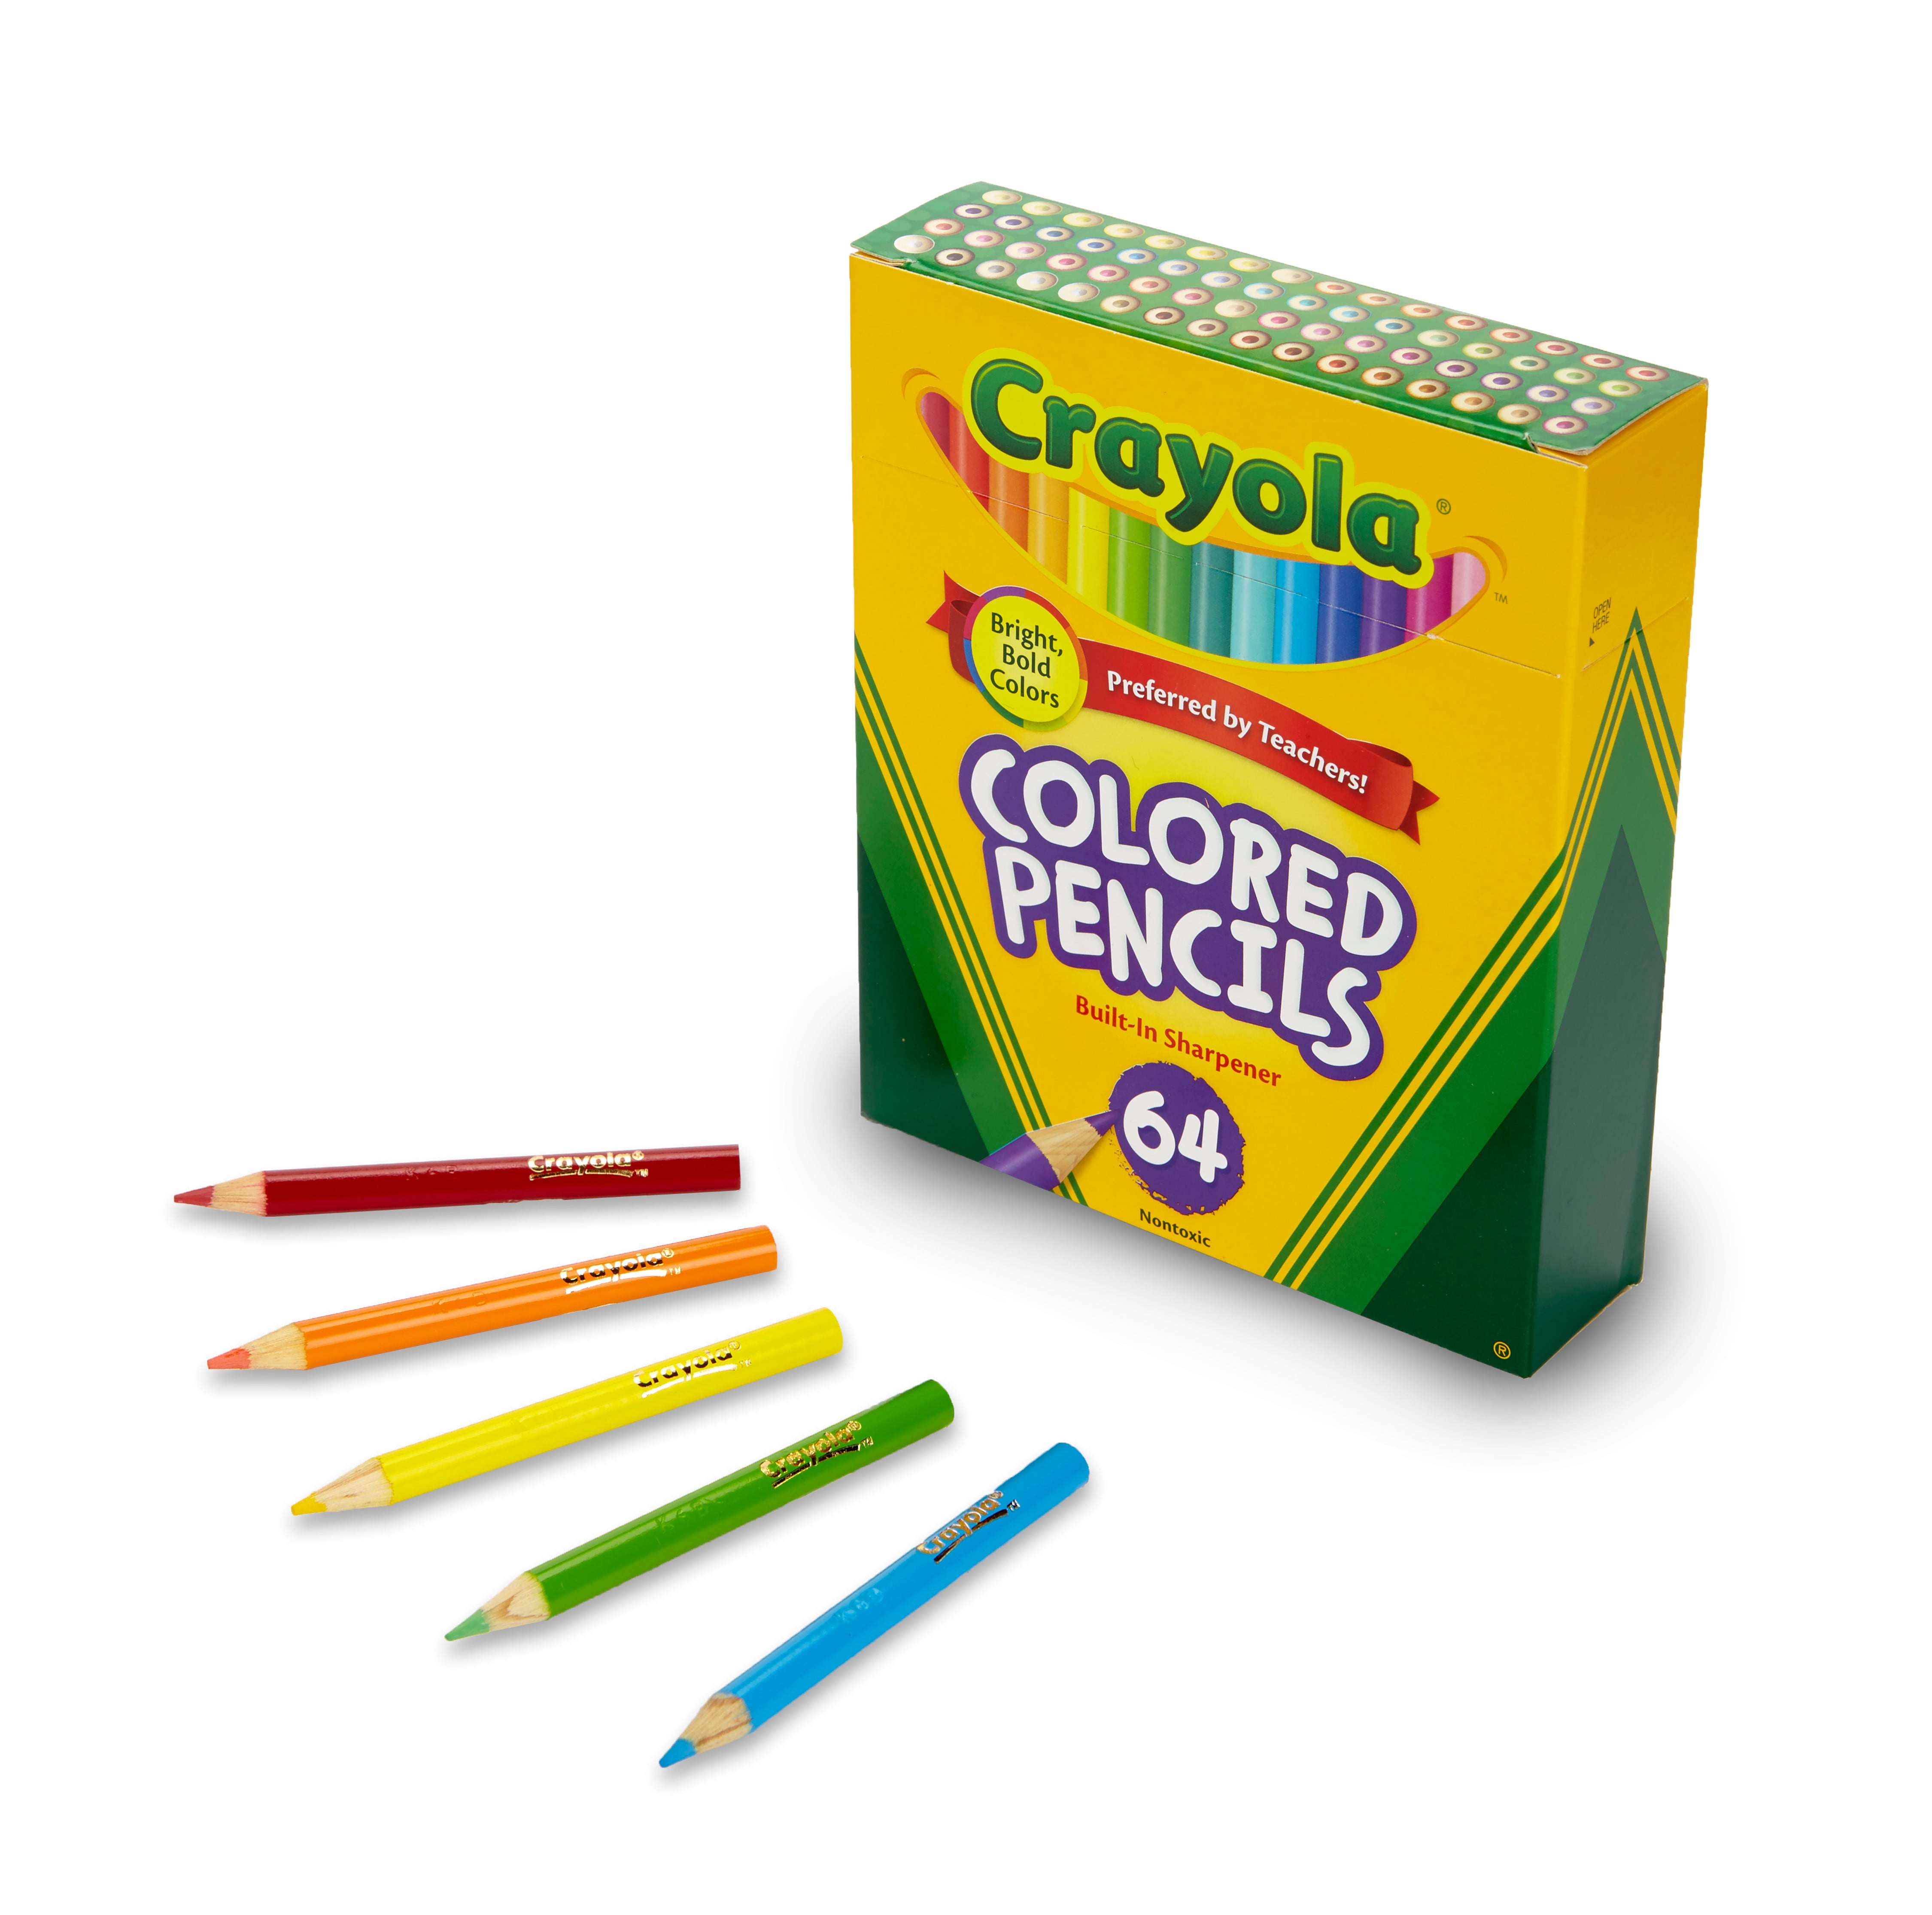 Crayola Mini Colored Pencils in Assorted Colors, Coloring Supplies for Kids,  64c